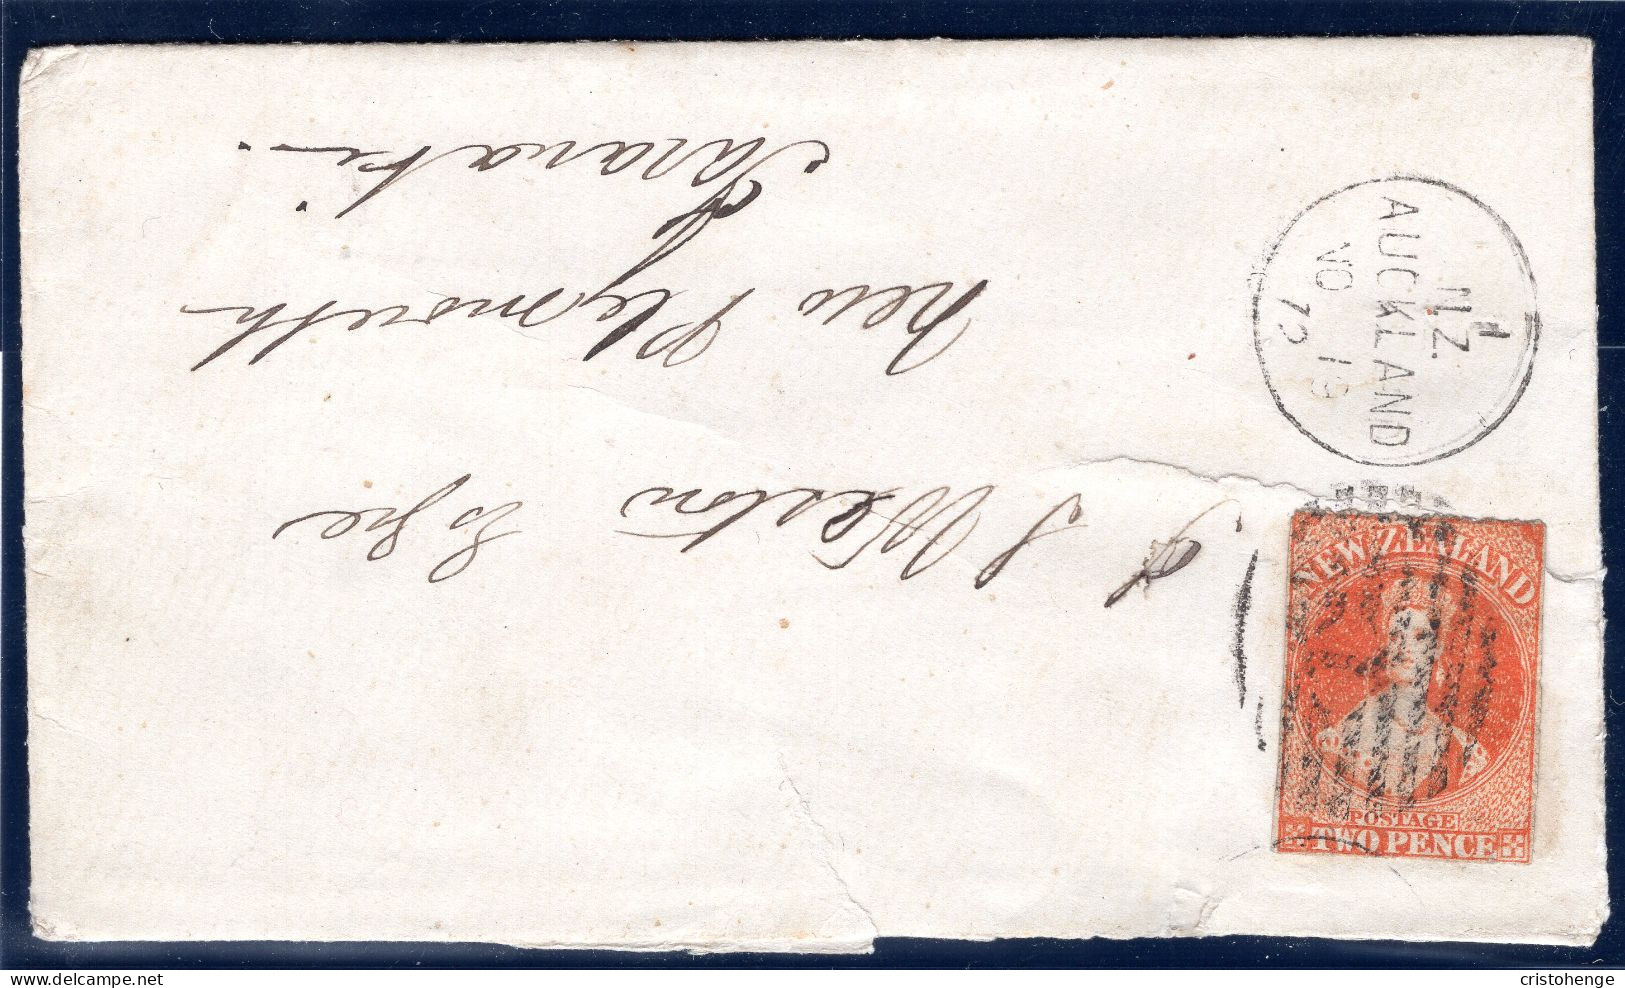 New Zealand 1872 2d Inland Letter Rate FFQ Chalon Cover Sent To Taranaki - Covers & Documents